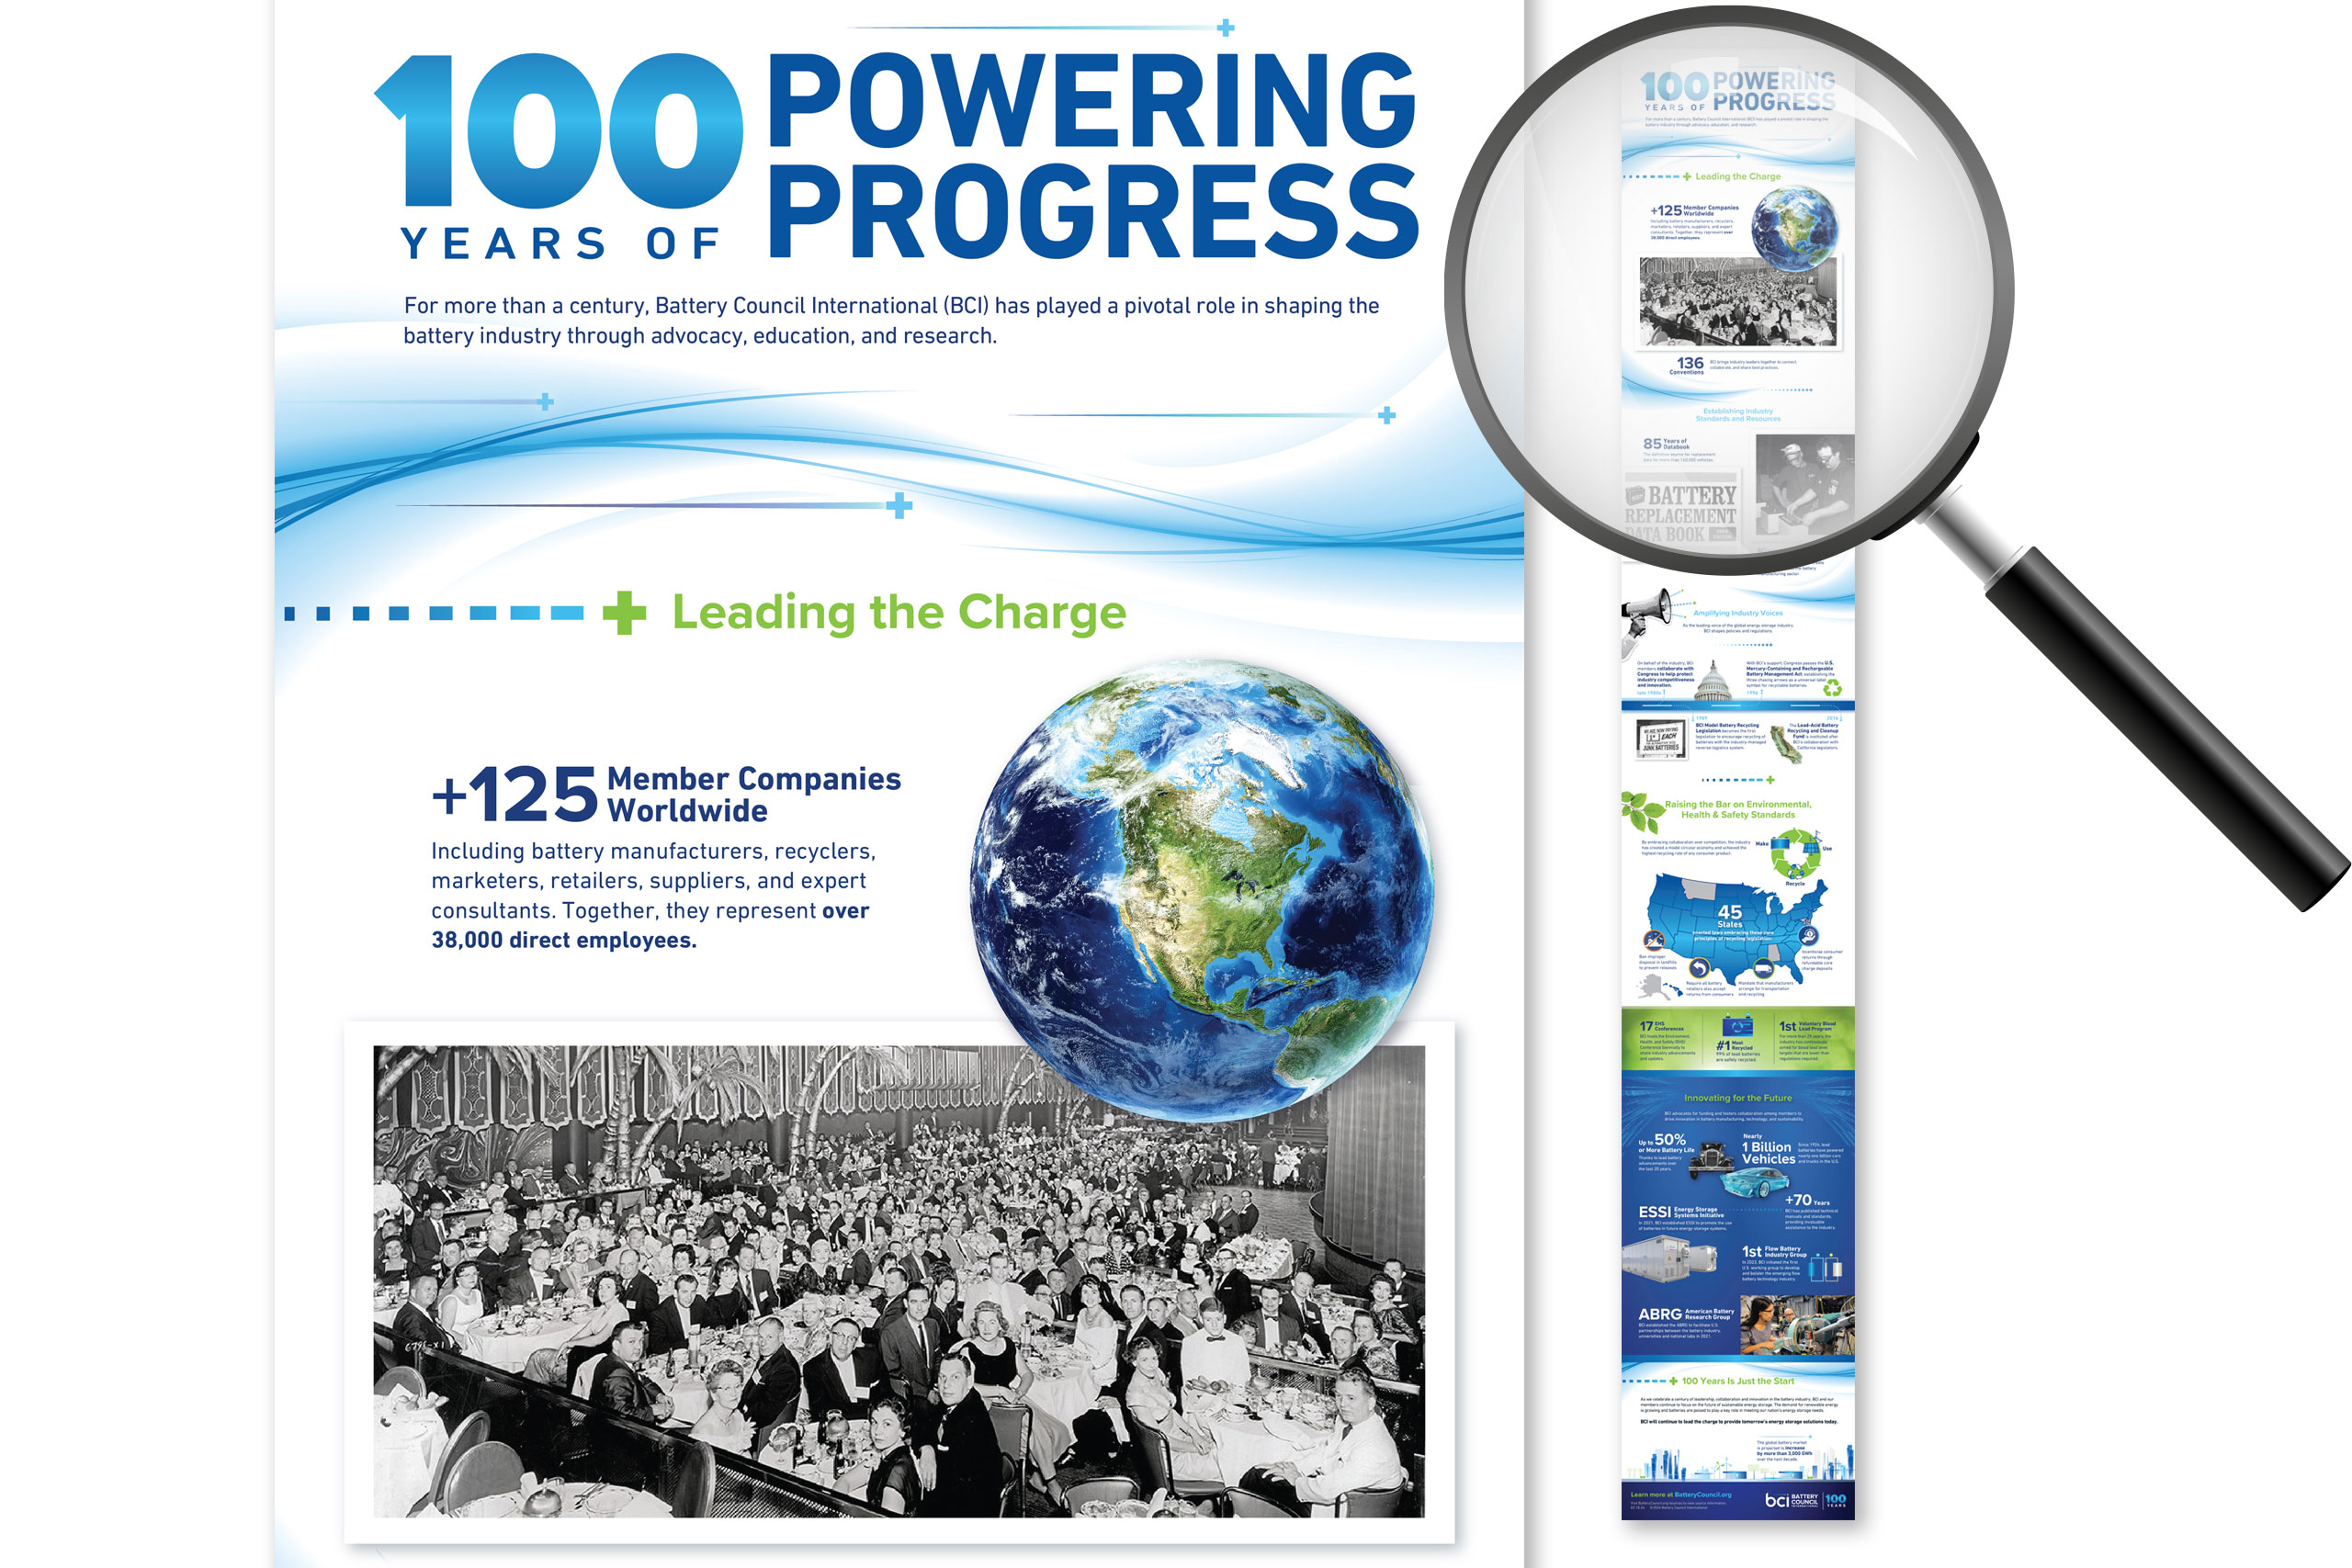 Thumbnail image of the BCI 100-Year infographic.